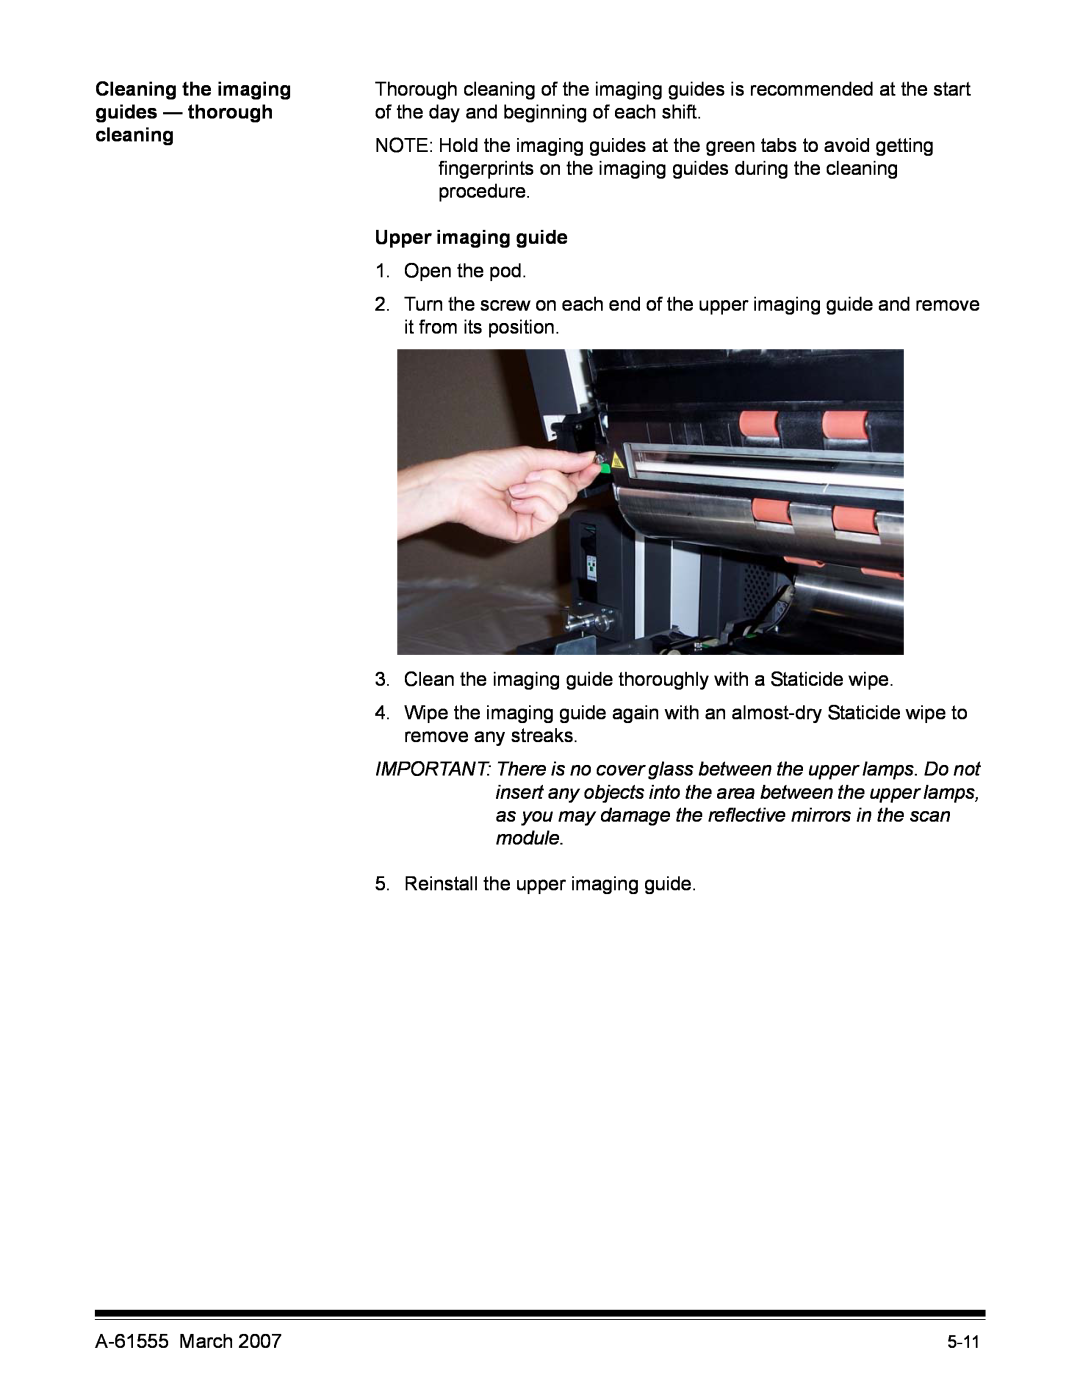 Kodak i1800 Series manual Cleaning the imaging guides — thorough cleaning, Upper imaging guide 